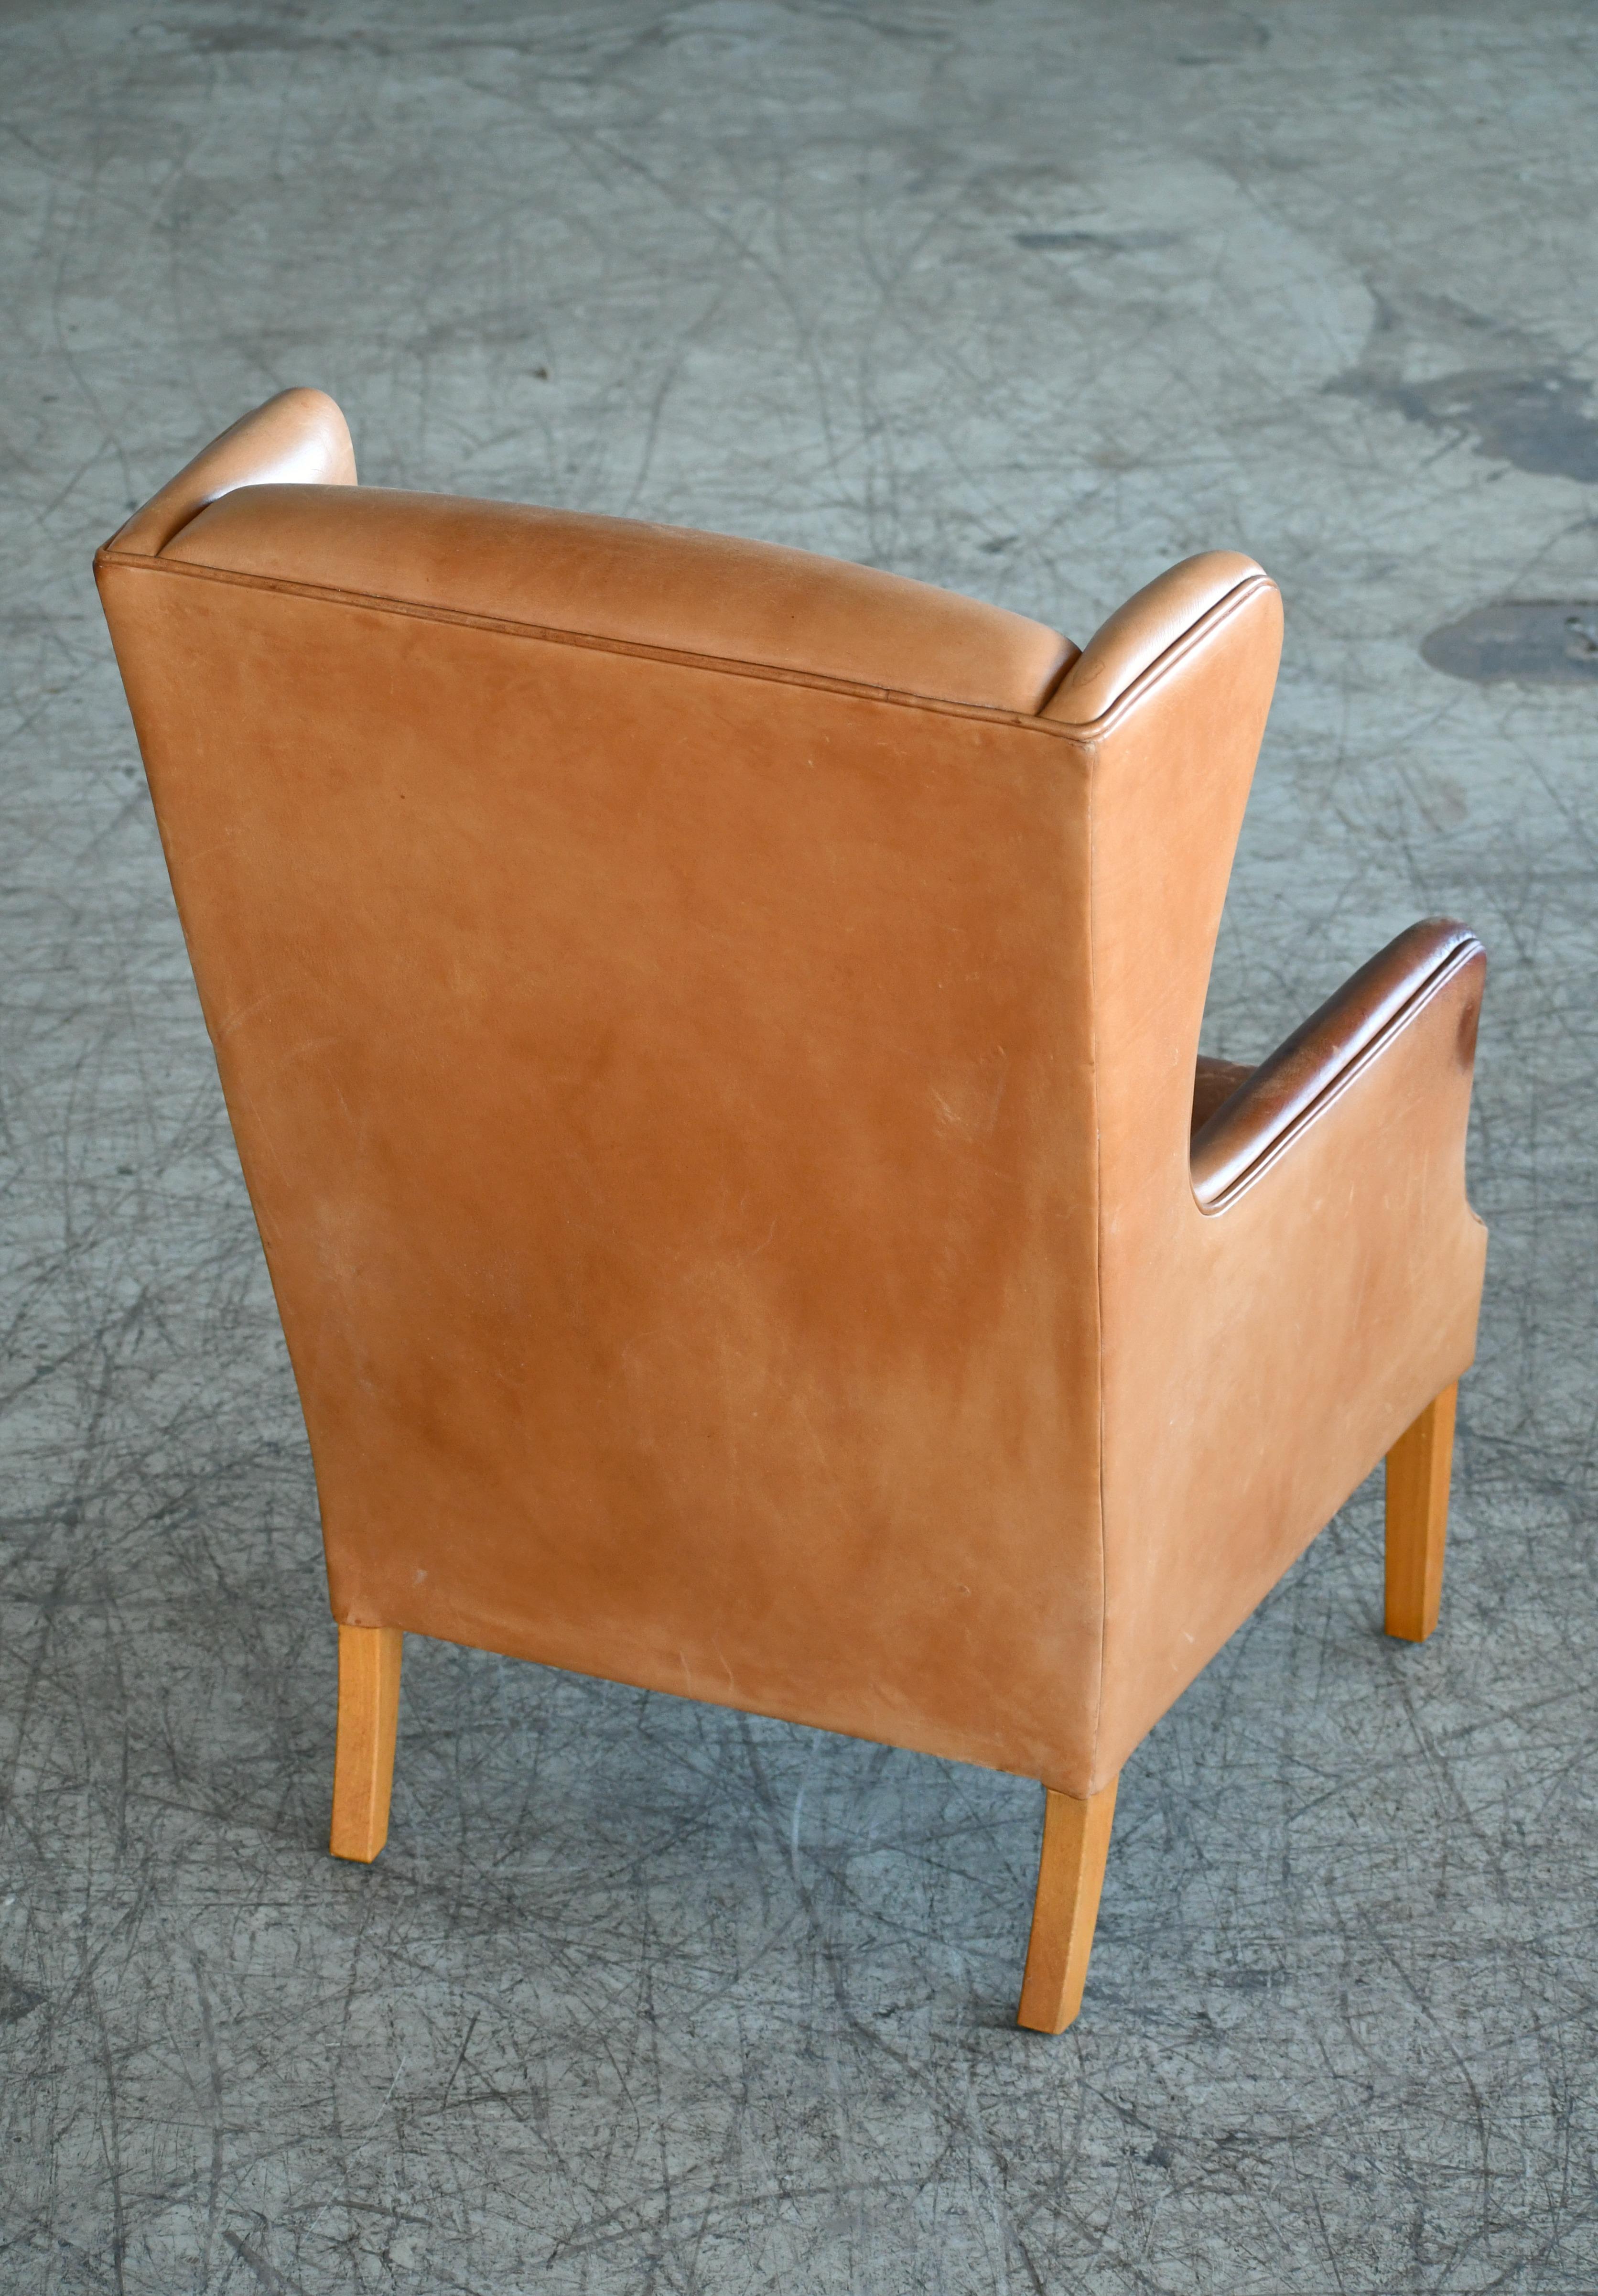 Mid-20th Century Danish Modern Kaare Klint Style Wingback Chair in Tan Leather with Patina